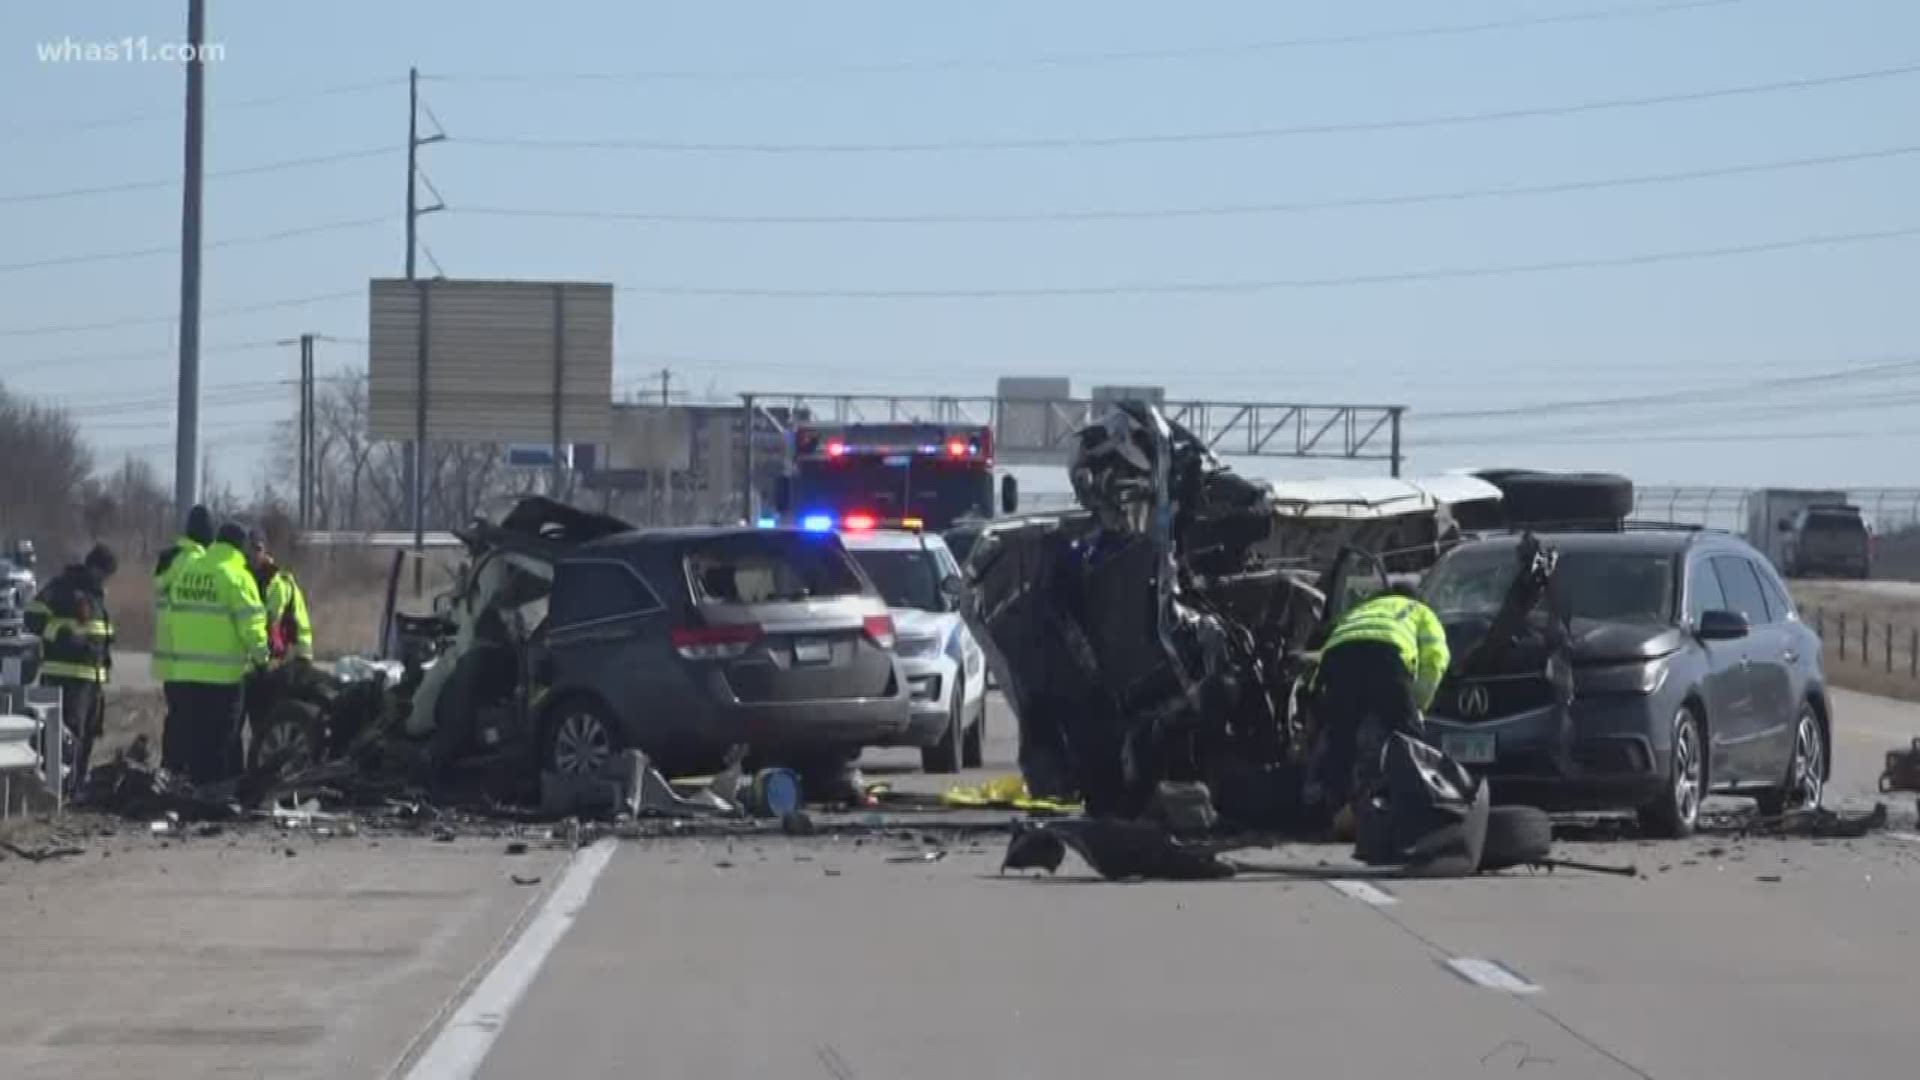 Two women and two children were killed in a wreck on their way to a national volleyball tournament.